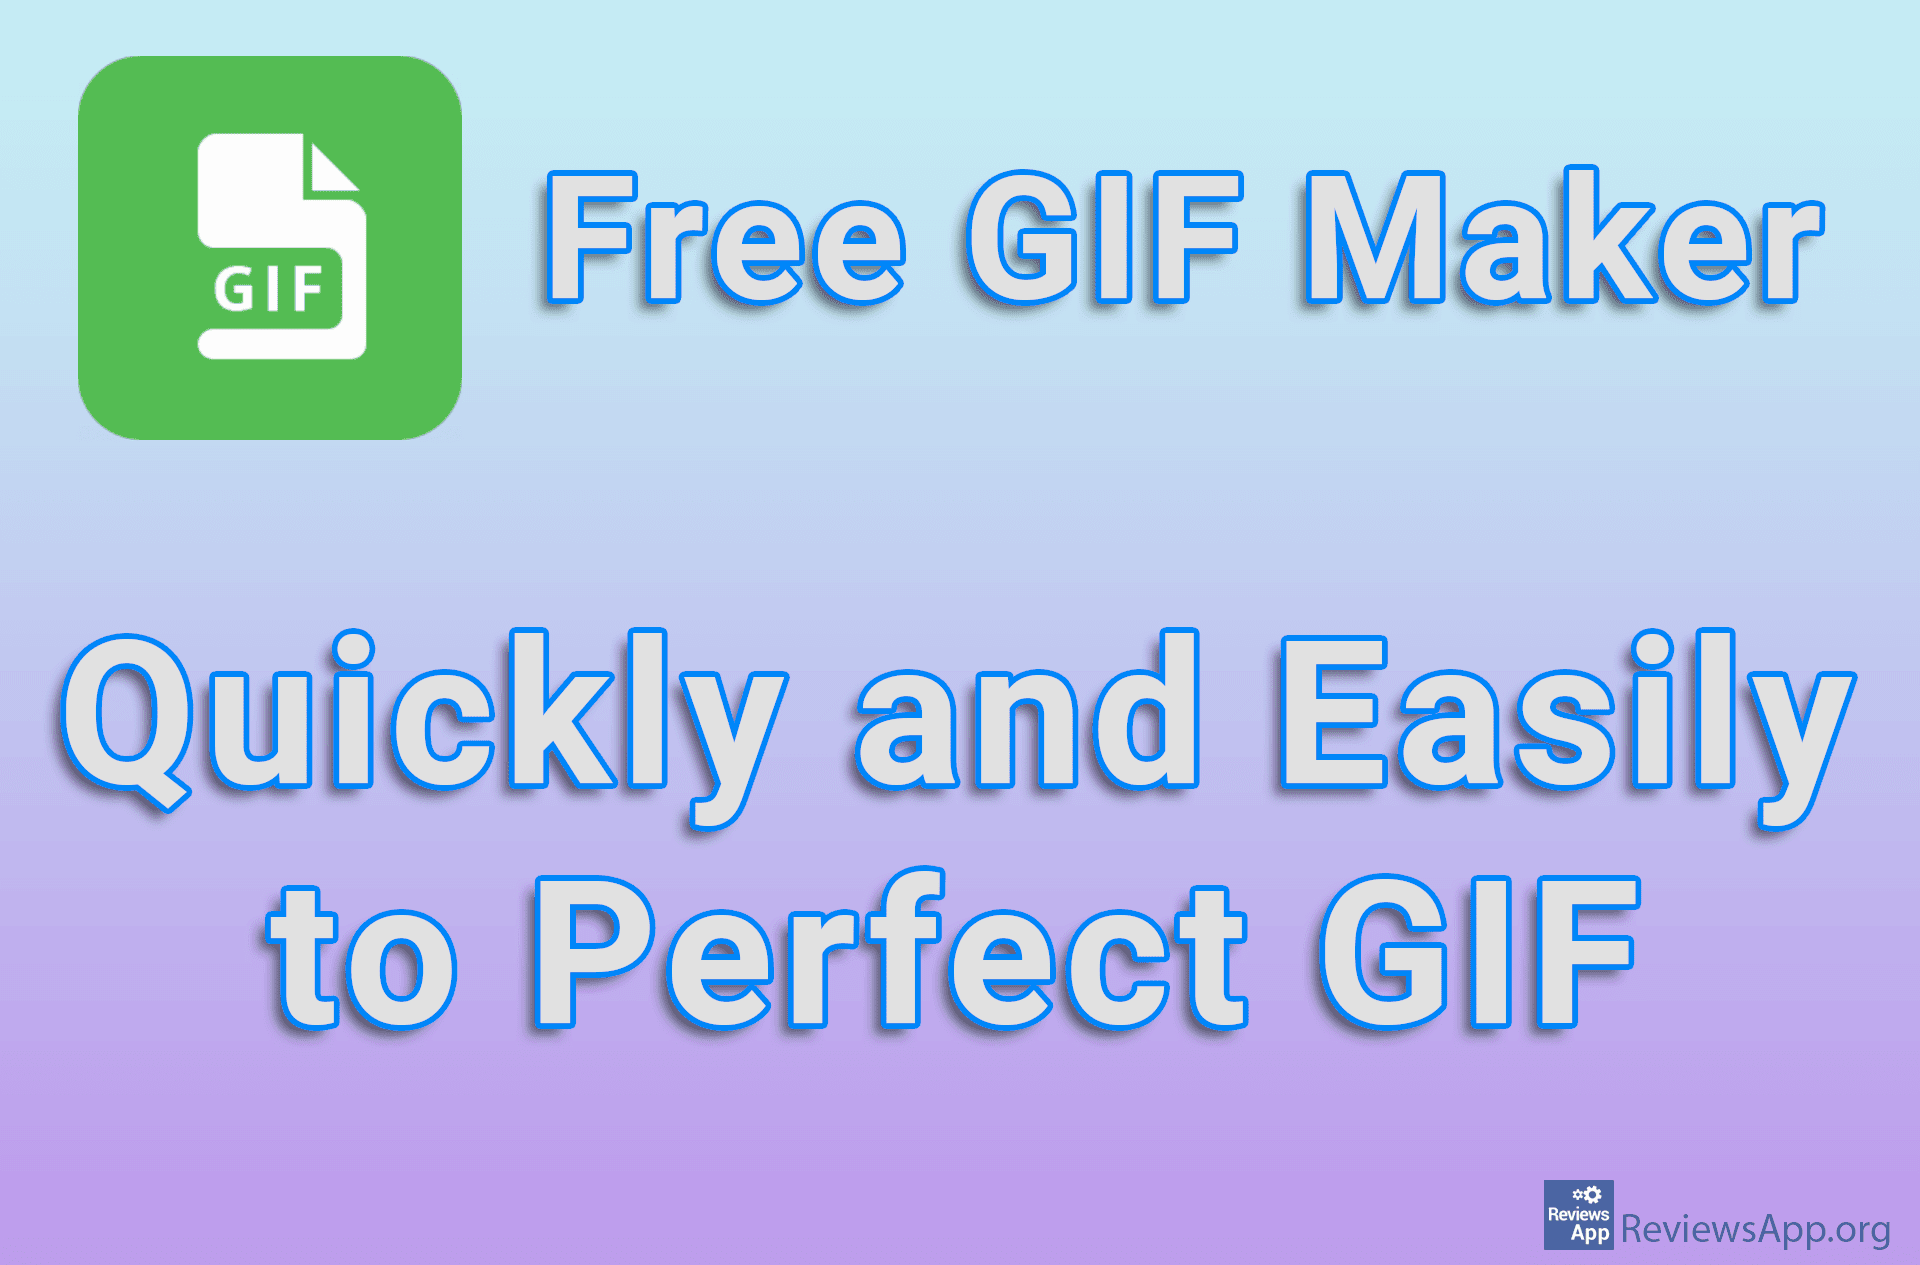 Free GIF Maker – Quickly and Easily to Perfect GIF